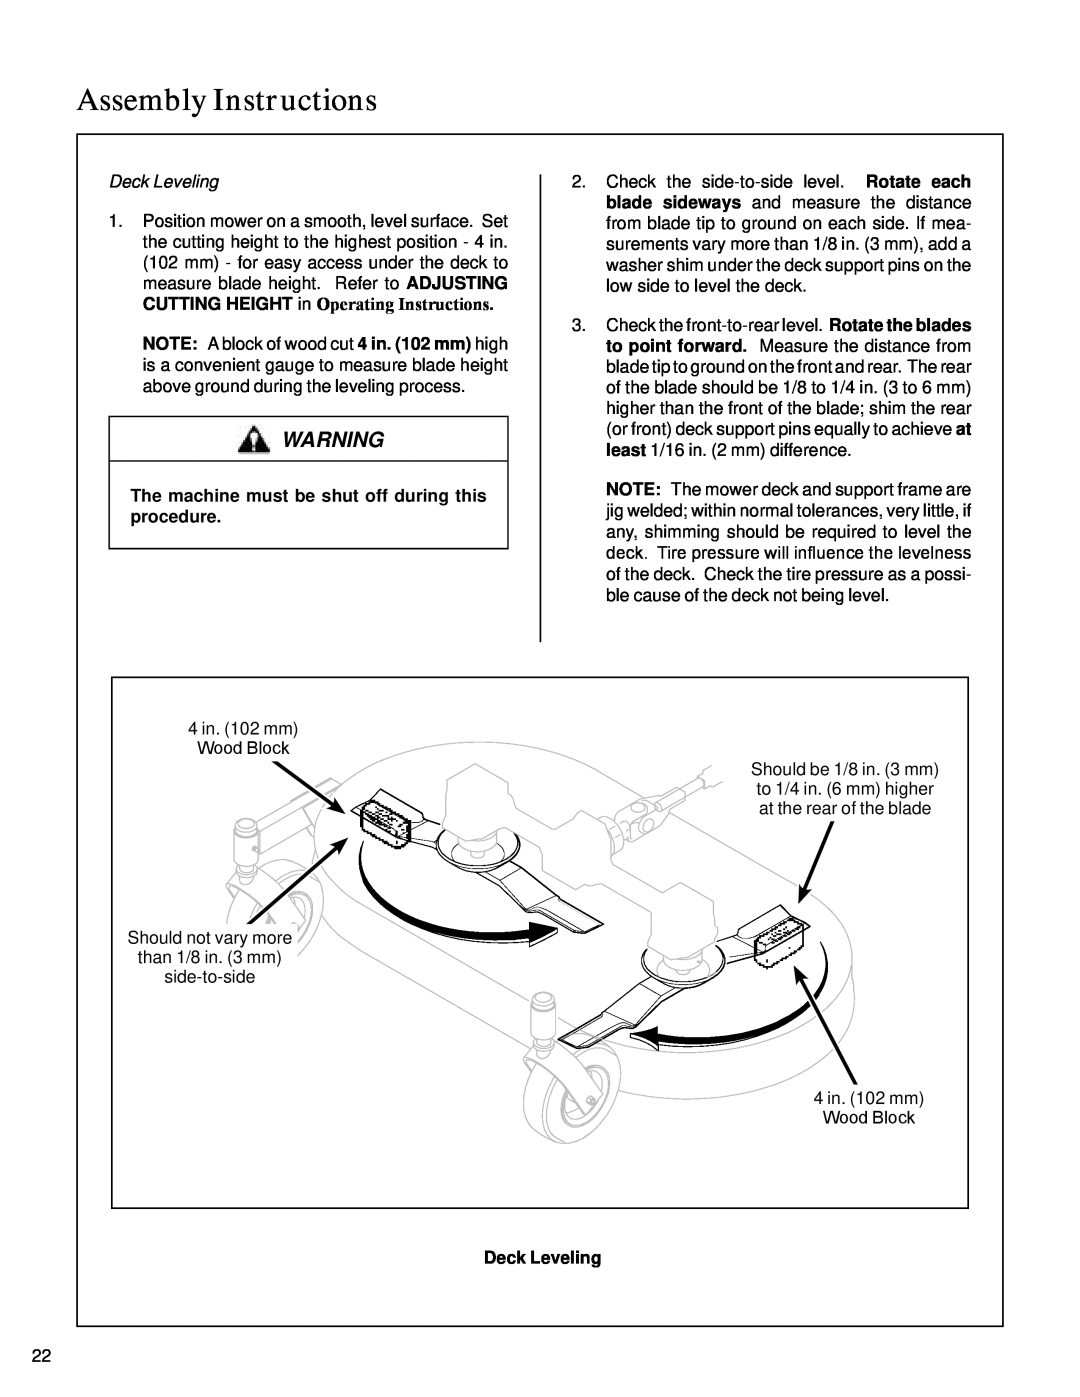 Walker S14 manual Deck Leveling, Assembly Instructions 